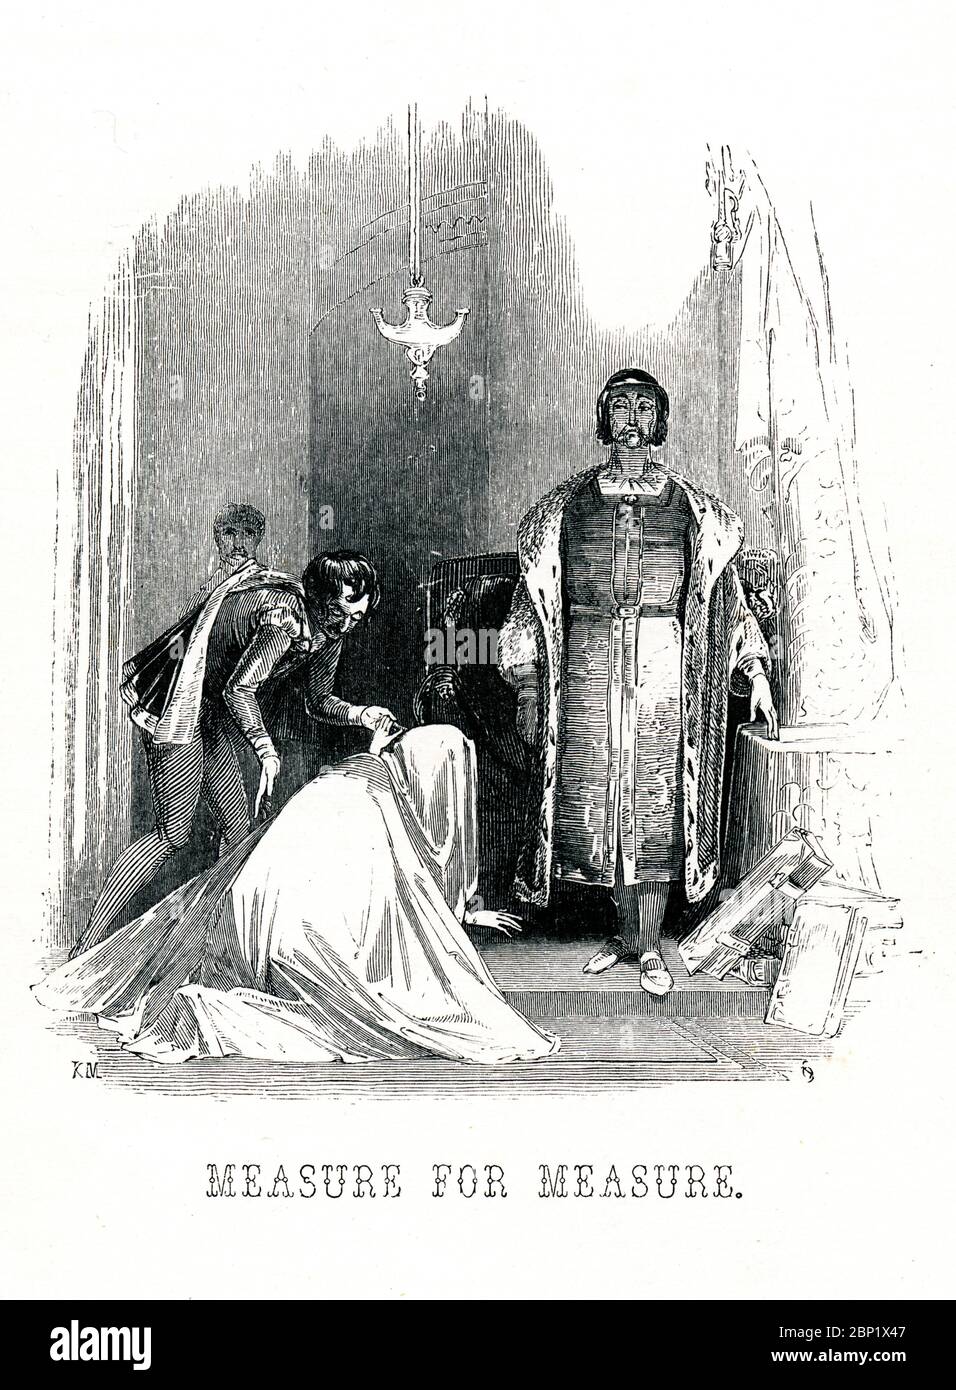 Measure For Measure Victorian book frontispiece for the play by William Shakespeare, from the 1849 illustrated book Heroines of Shakespeare Stock Photo